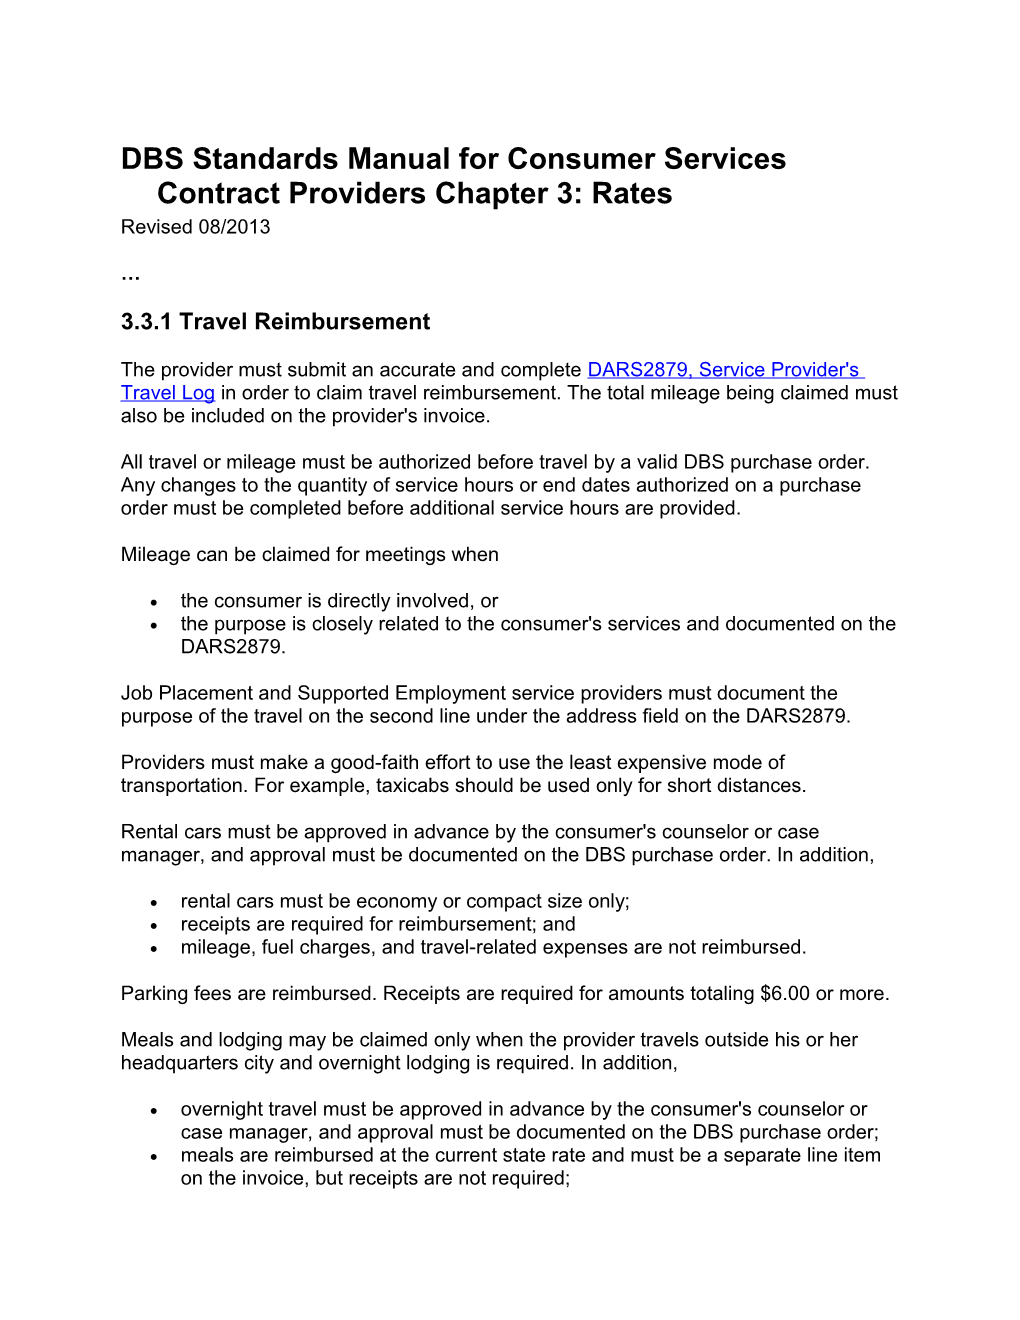 DBS Standards Manual for Consumer Services Contract Providers Chapter 3 Revisions, August 2013